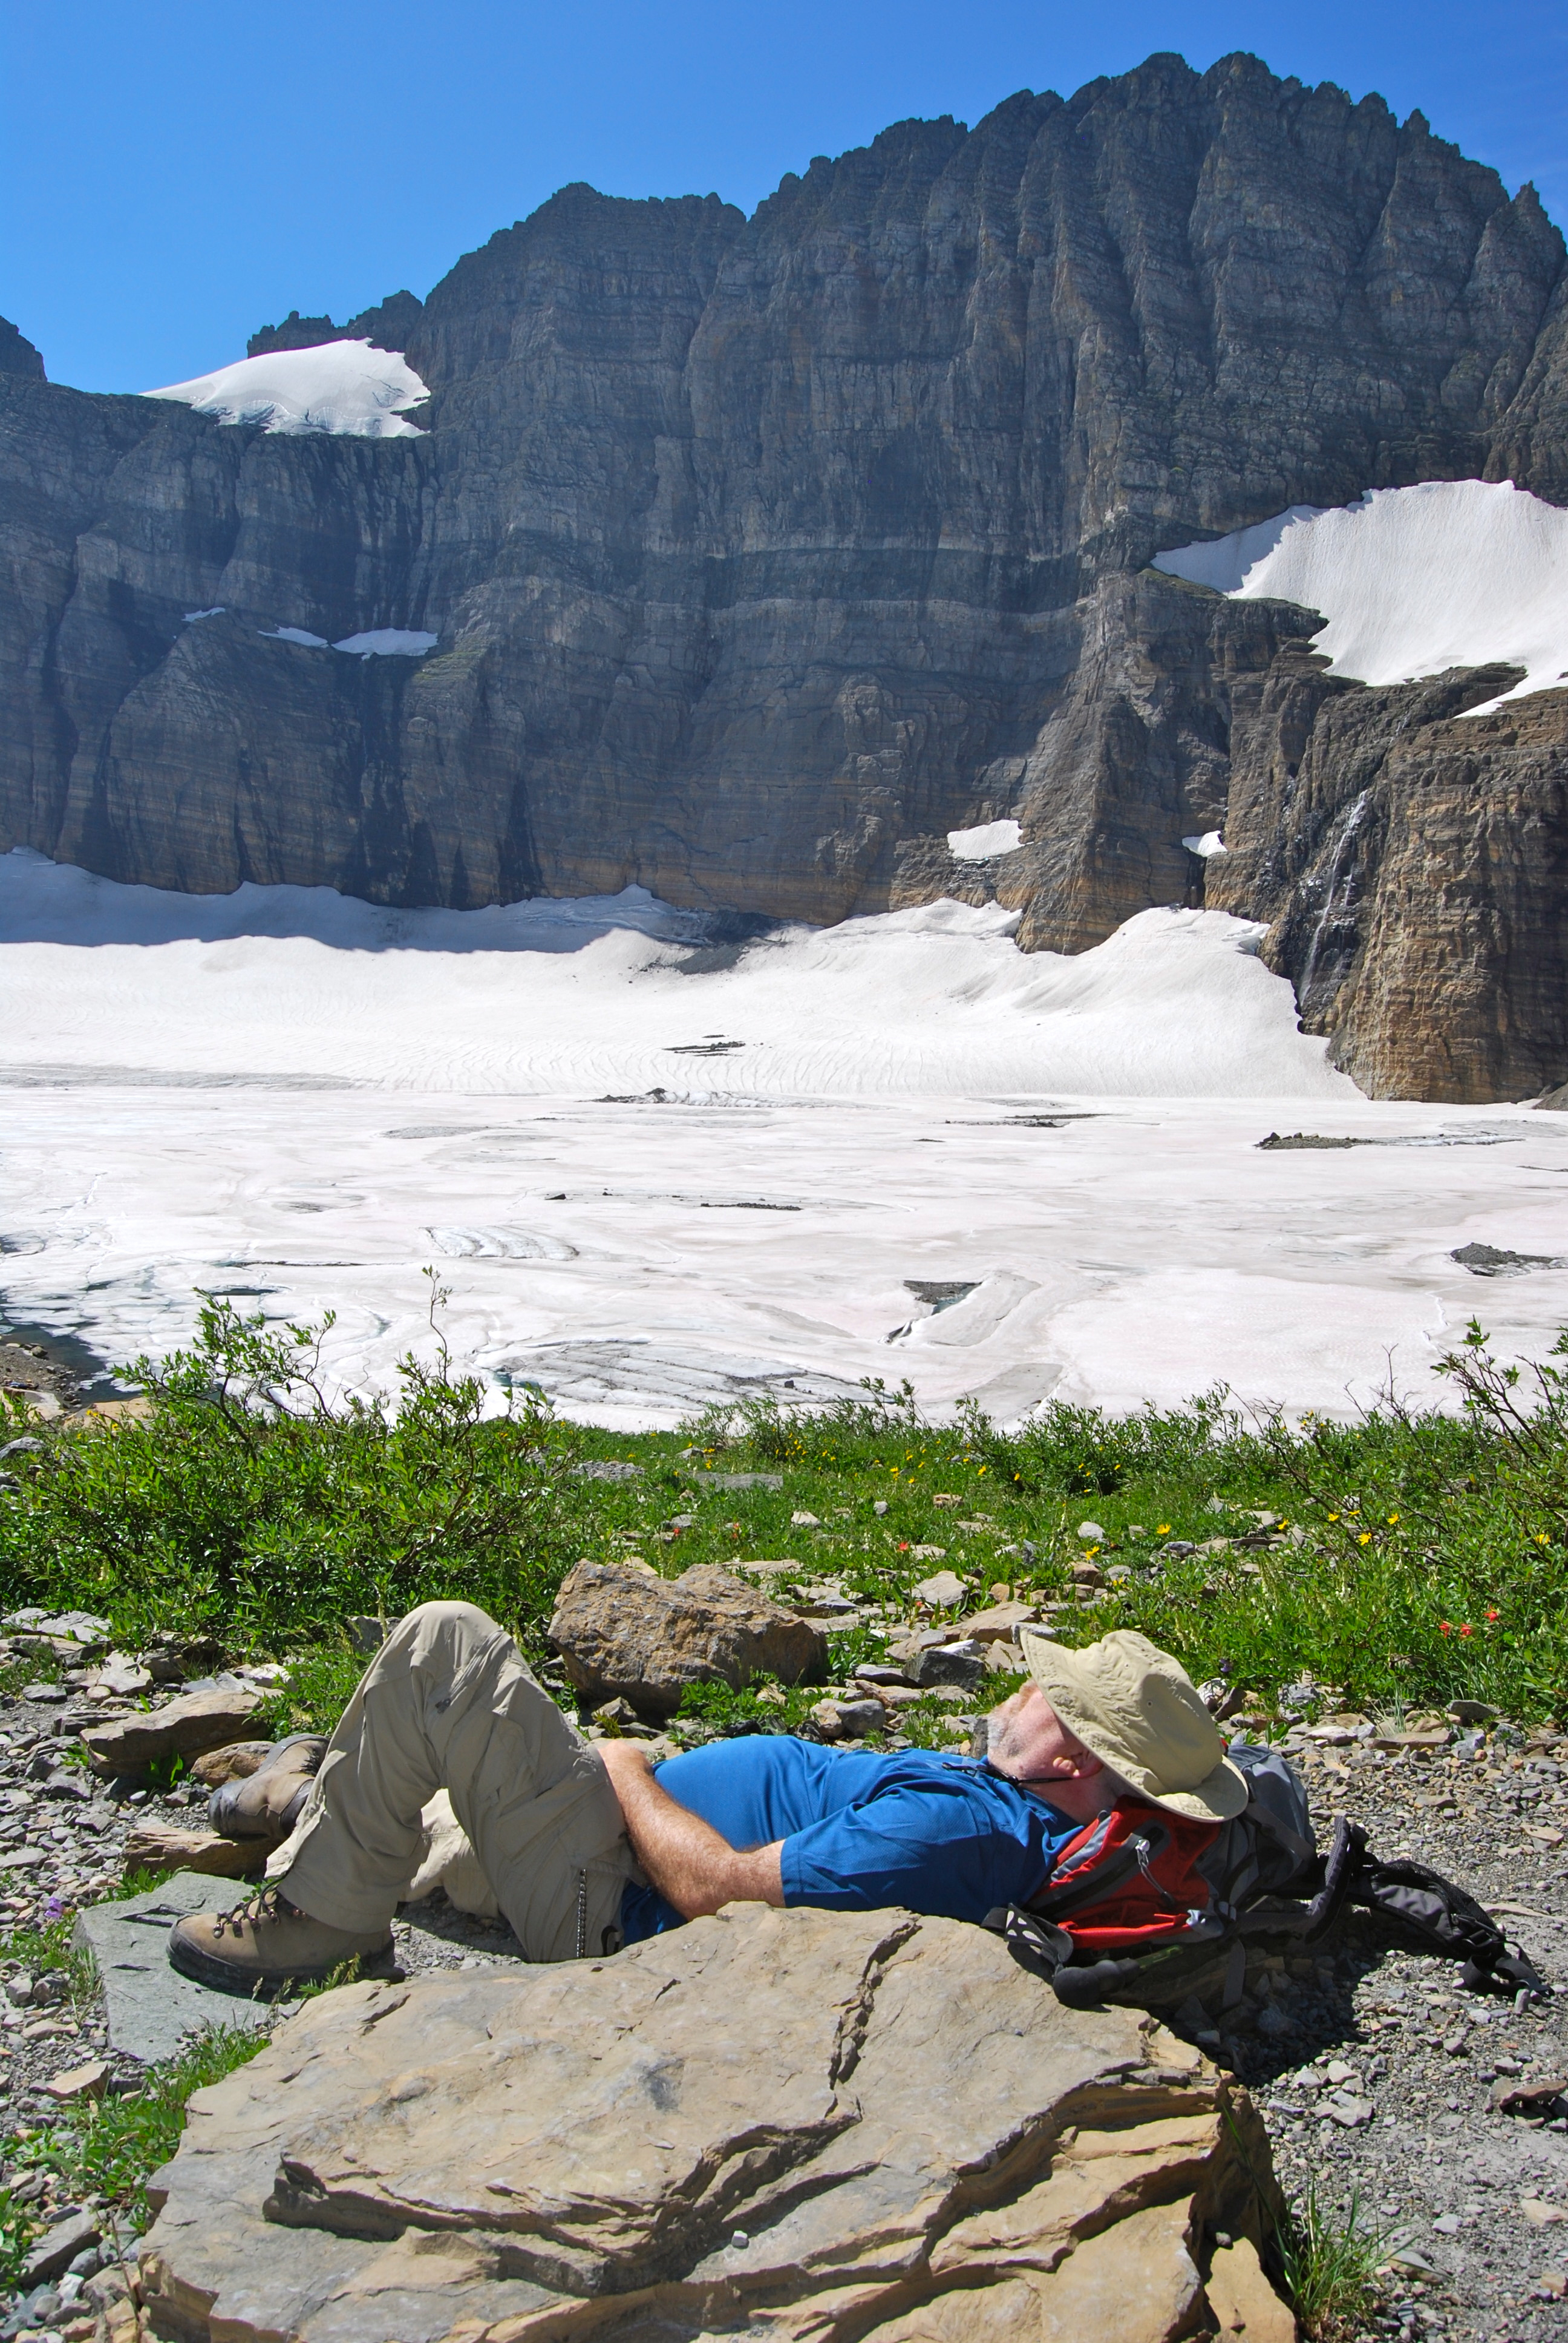 We are thankful for Glacier National Park and a Glacier Guides guest napping below Grinnell Glacier in Glacier National Park, Montana.